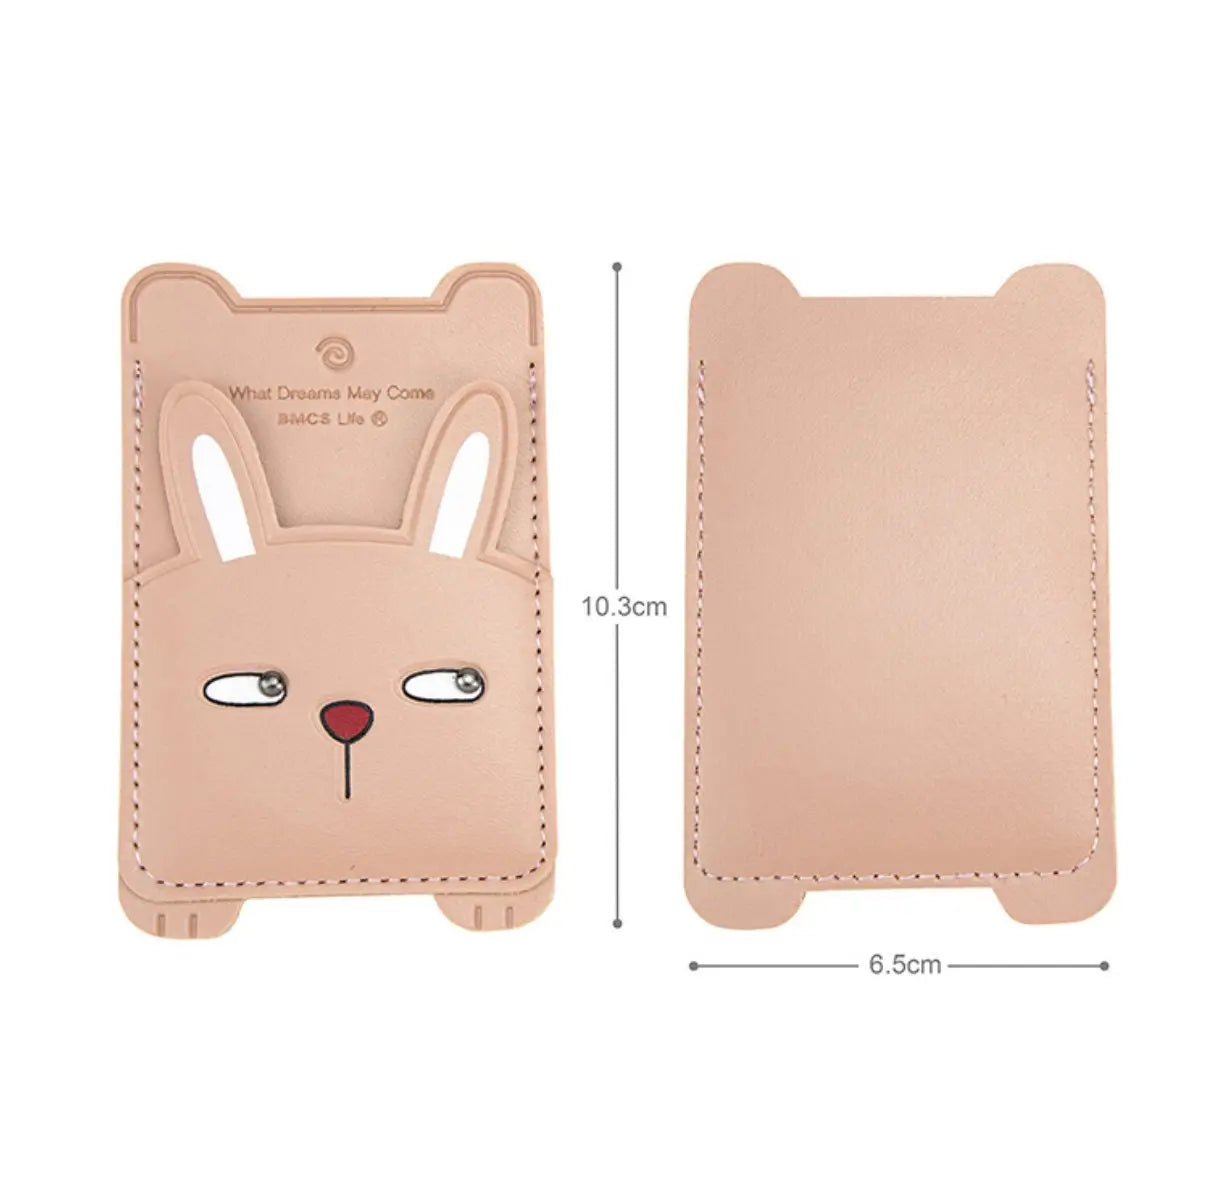 Personalized PU Leather Sticky Mobile Phone Wallet Card Holder Pink Rabbit or White Panda Sunday's Creative